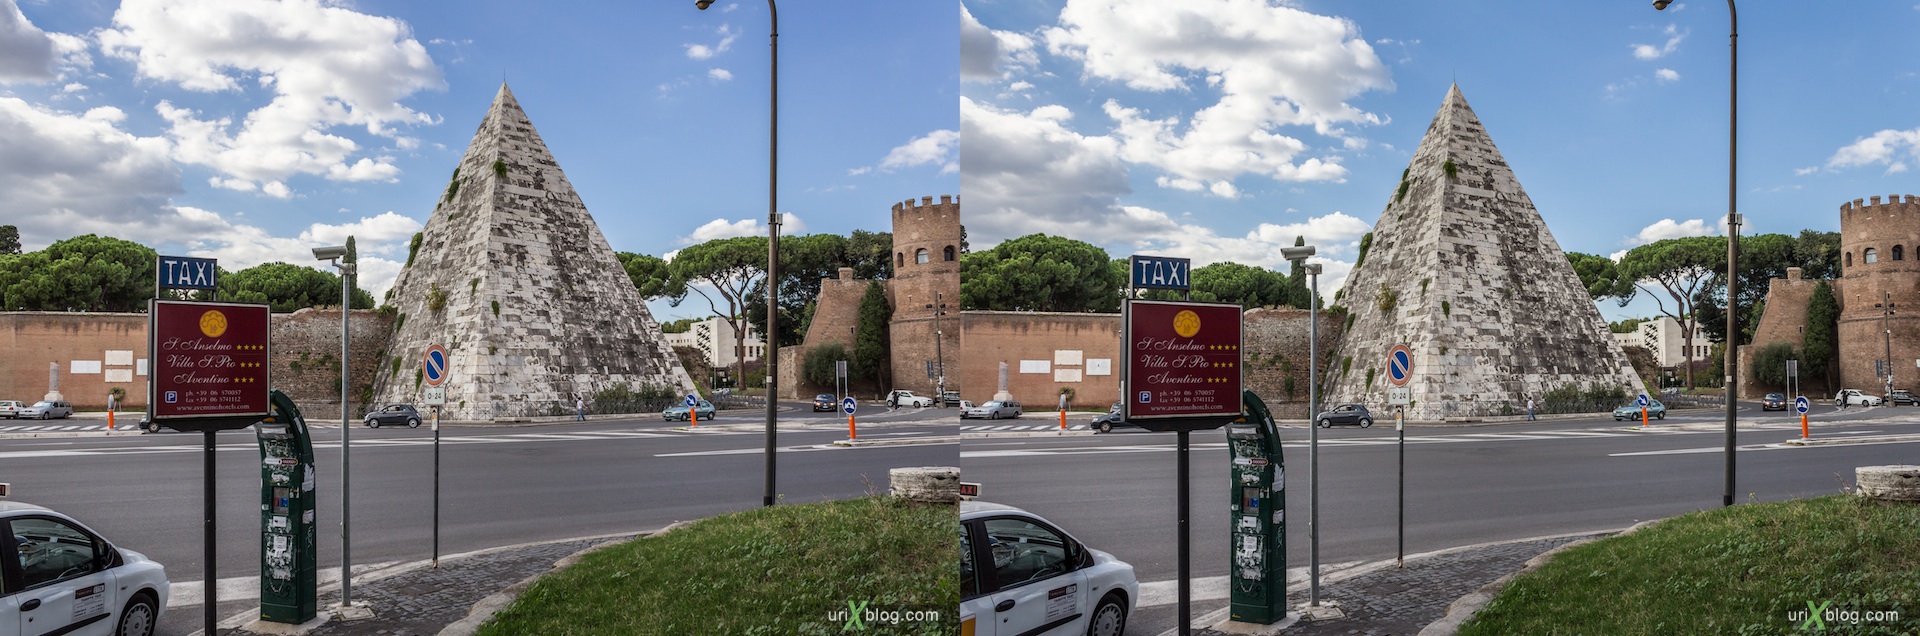 2012, Pyramid of Cestius, metro station, Rome, Italy, Europe, 3D, stereo pair, cross-eyed, crossview, cross view stereo pair